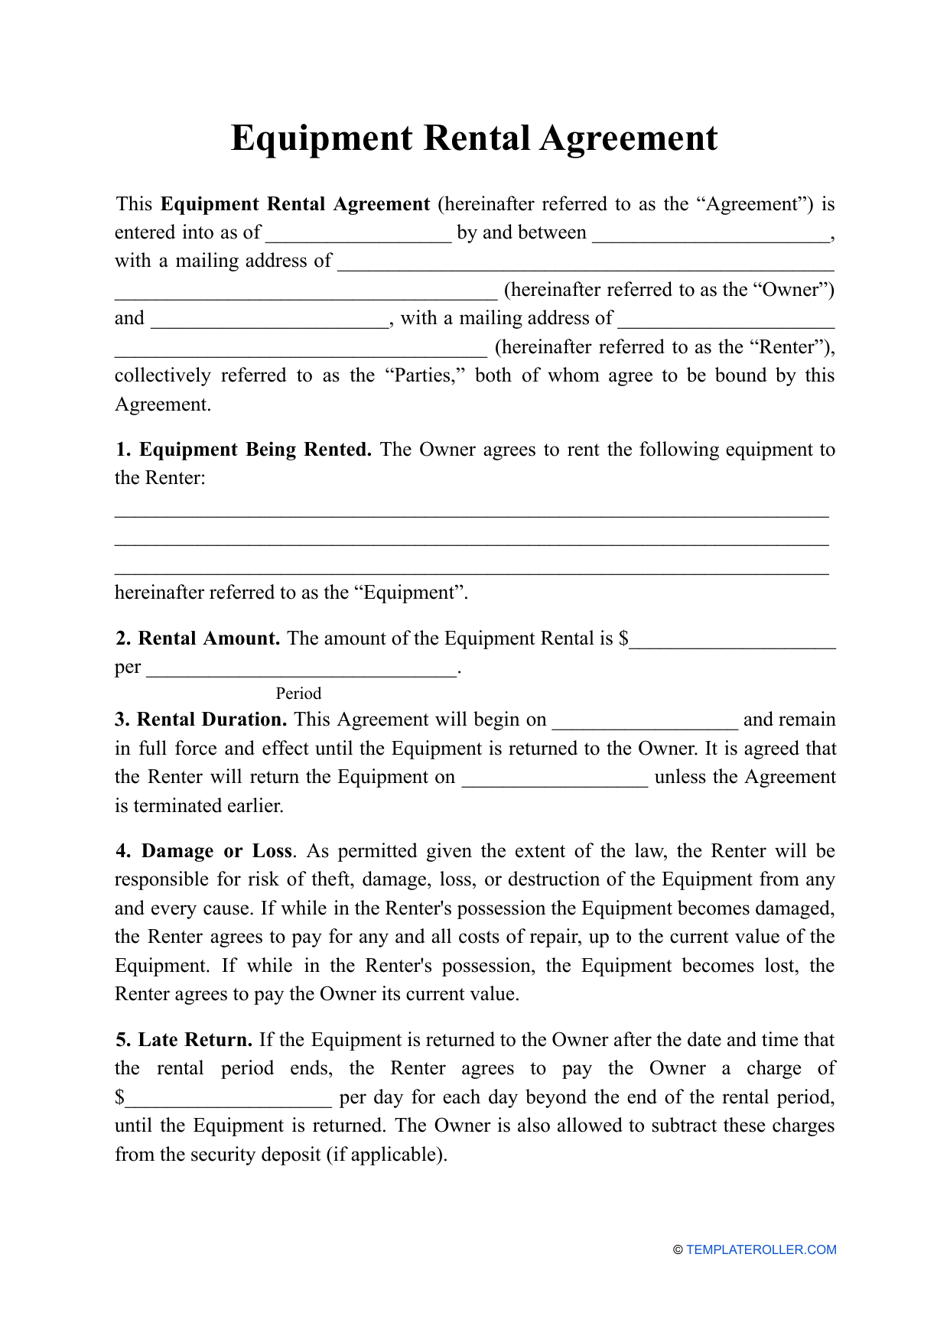 Equipment Rental Agreement Template Download Printable PDF Inside party equipment rental agreement template